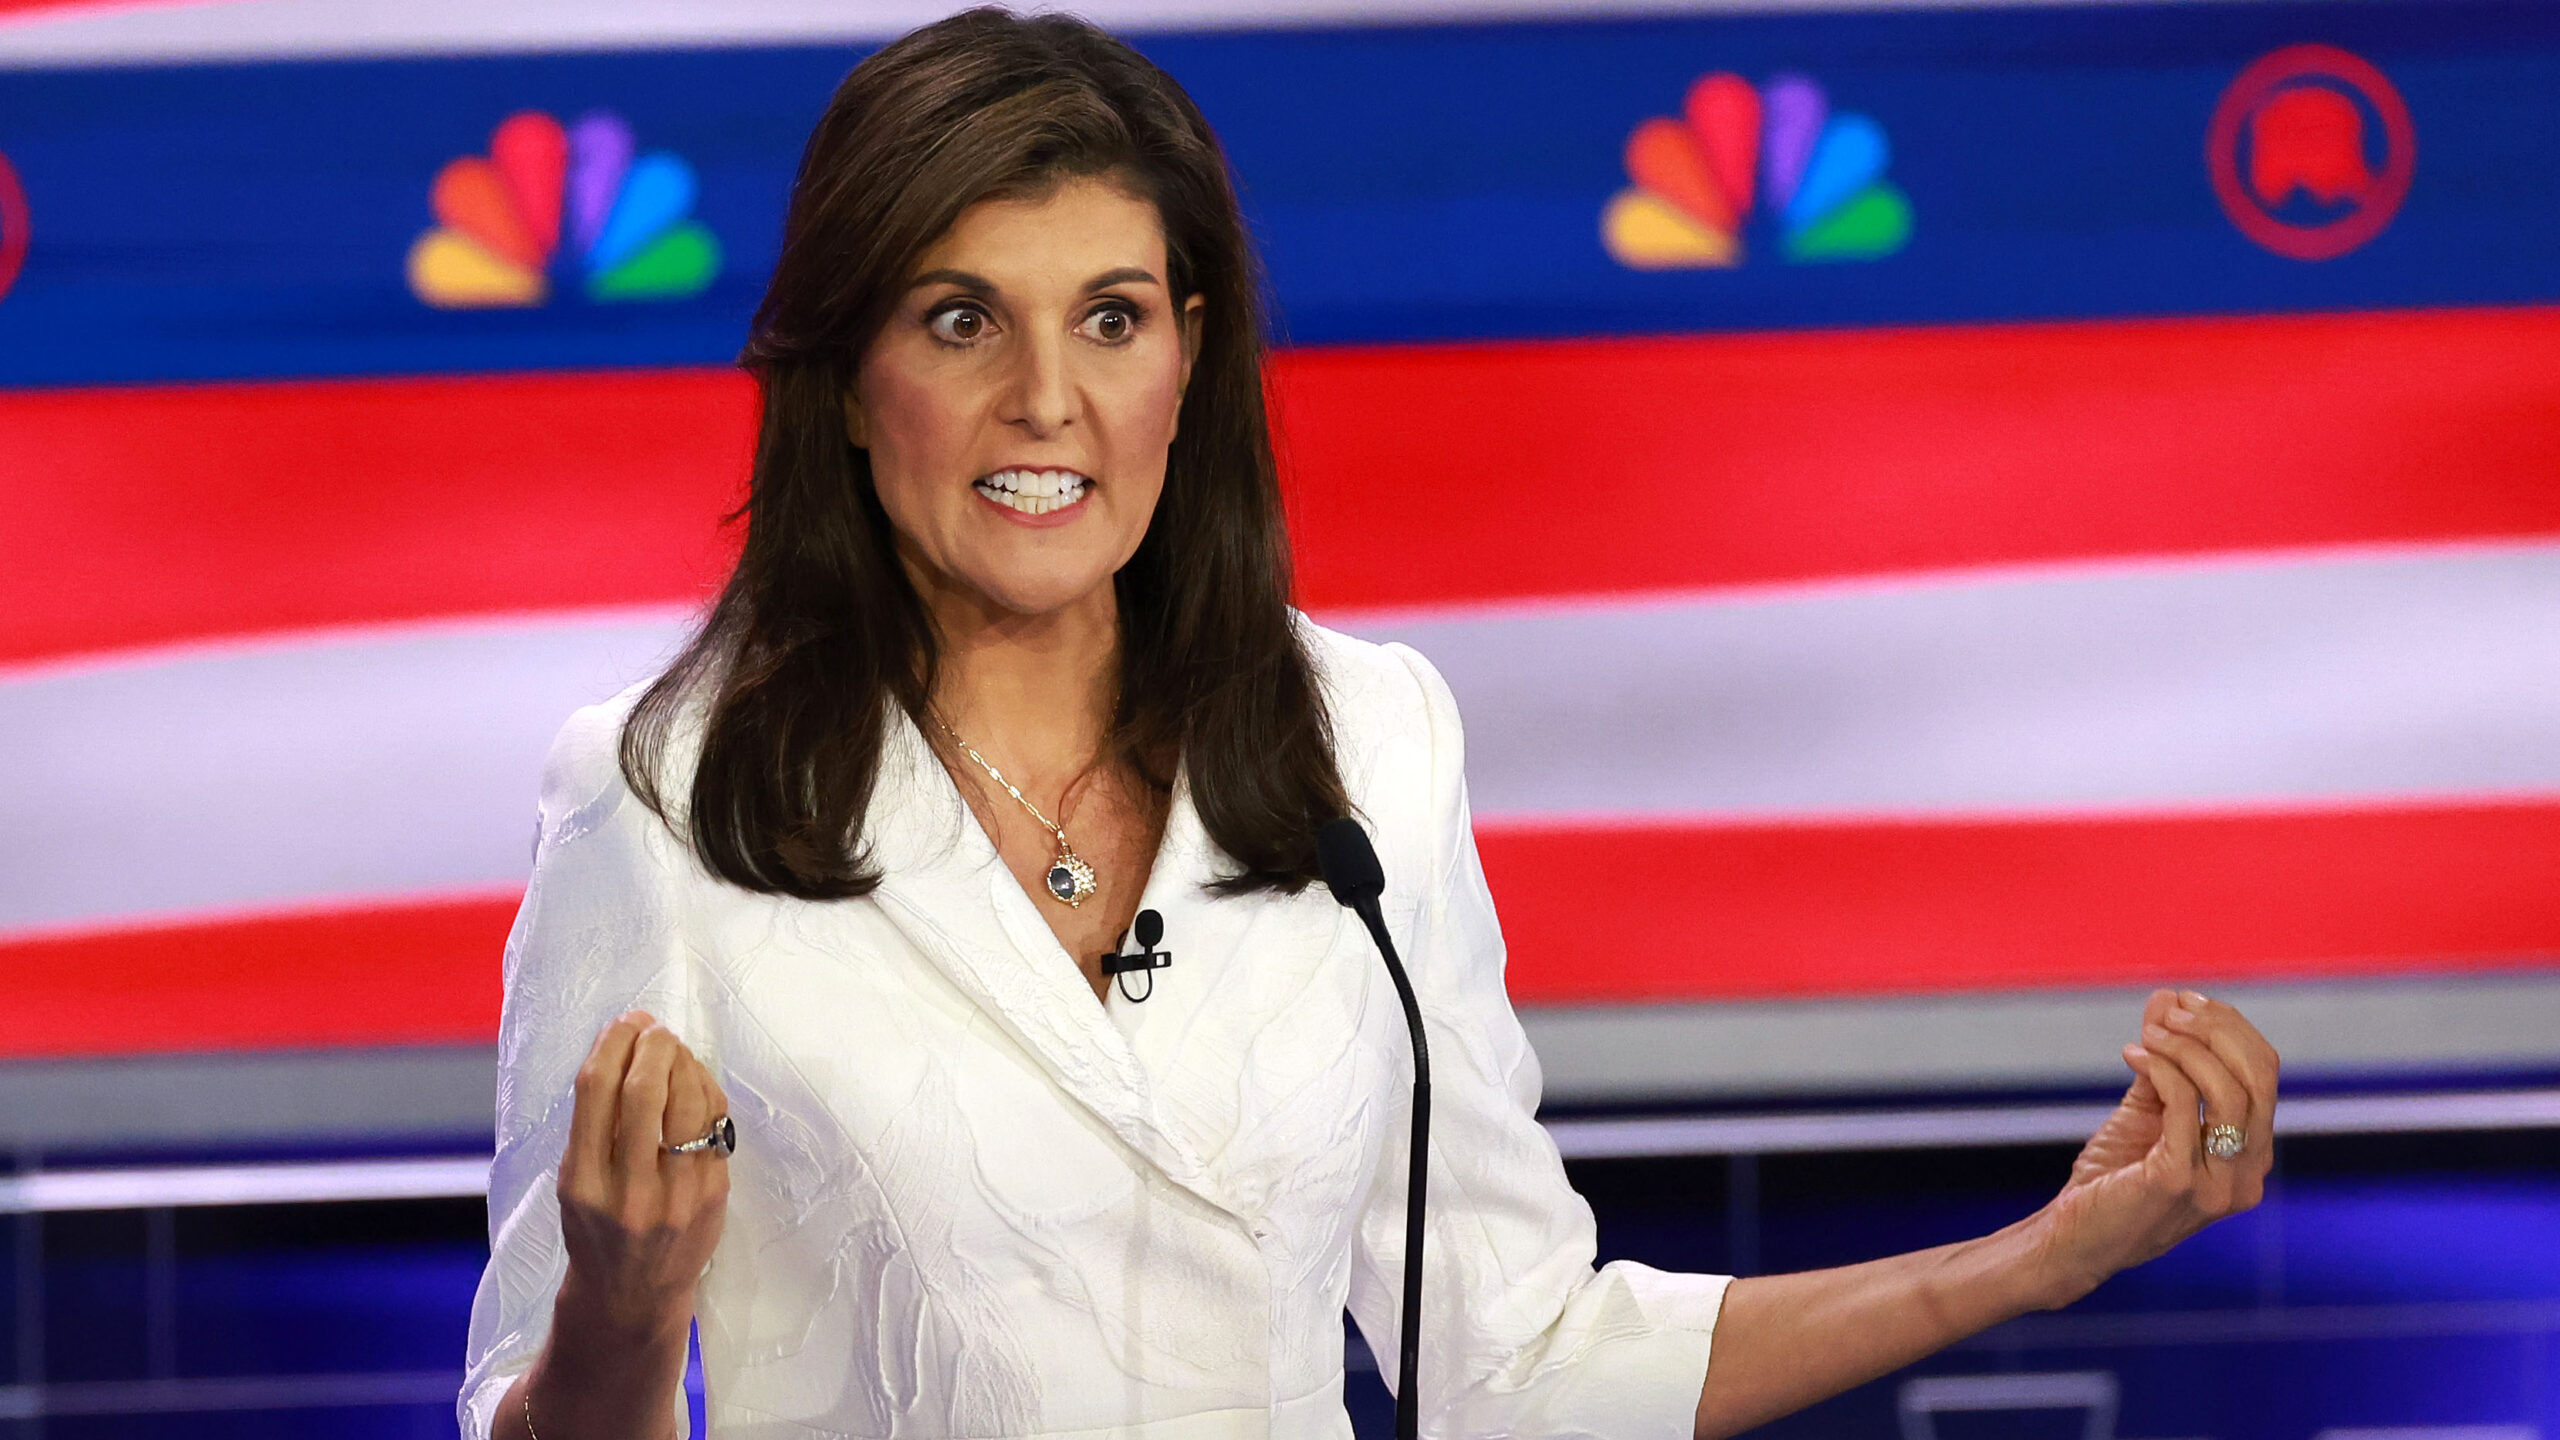 Nikki Haley fiercely confronts Vivek Ramaswamy in debate: ‘You’re despicable’